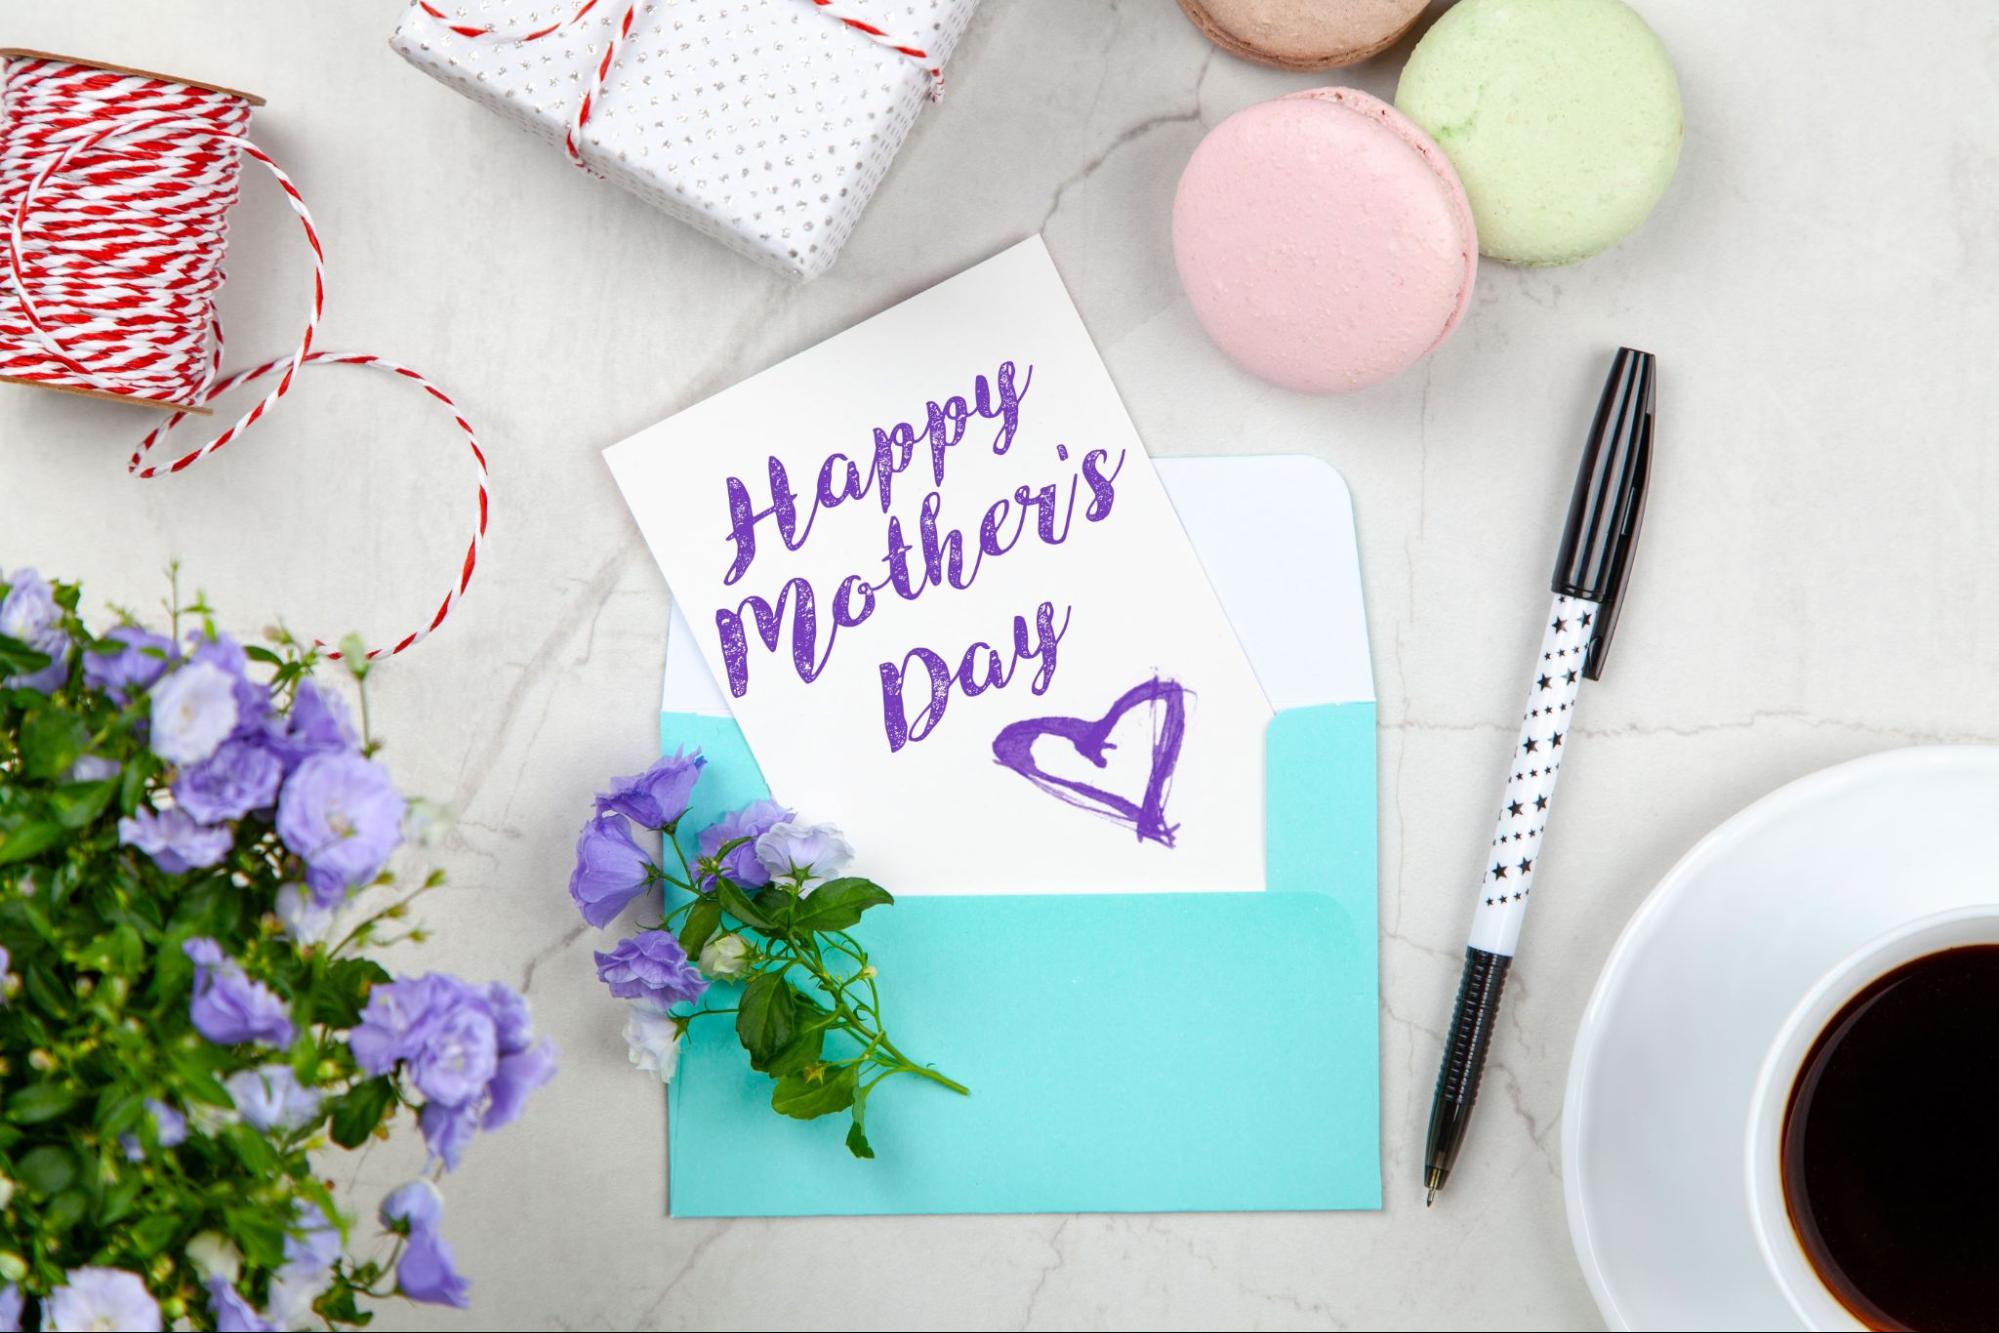 a Mother’s Day card on a table next to flowers and other items